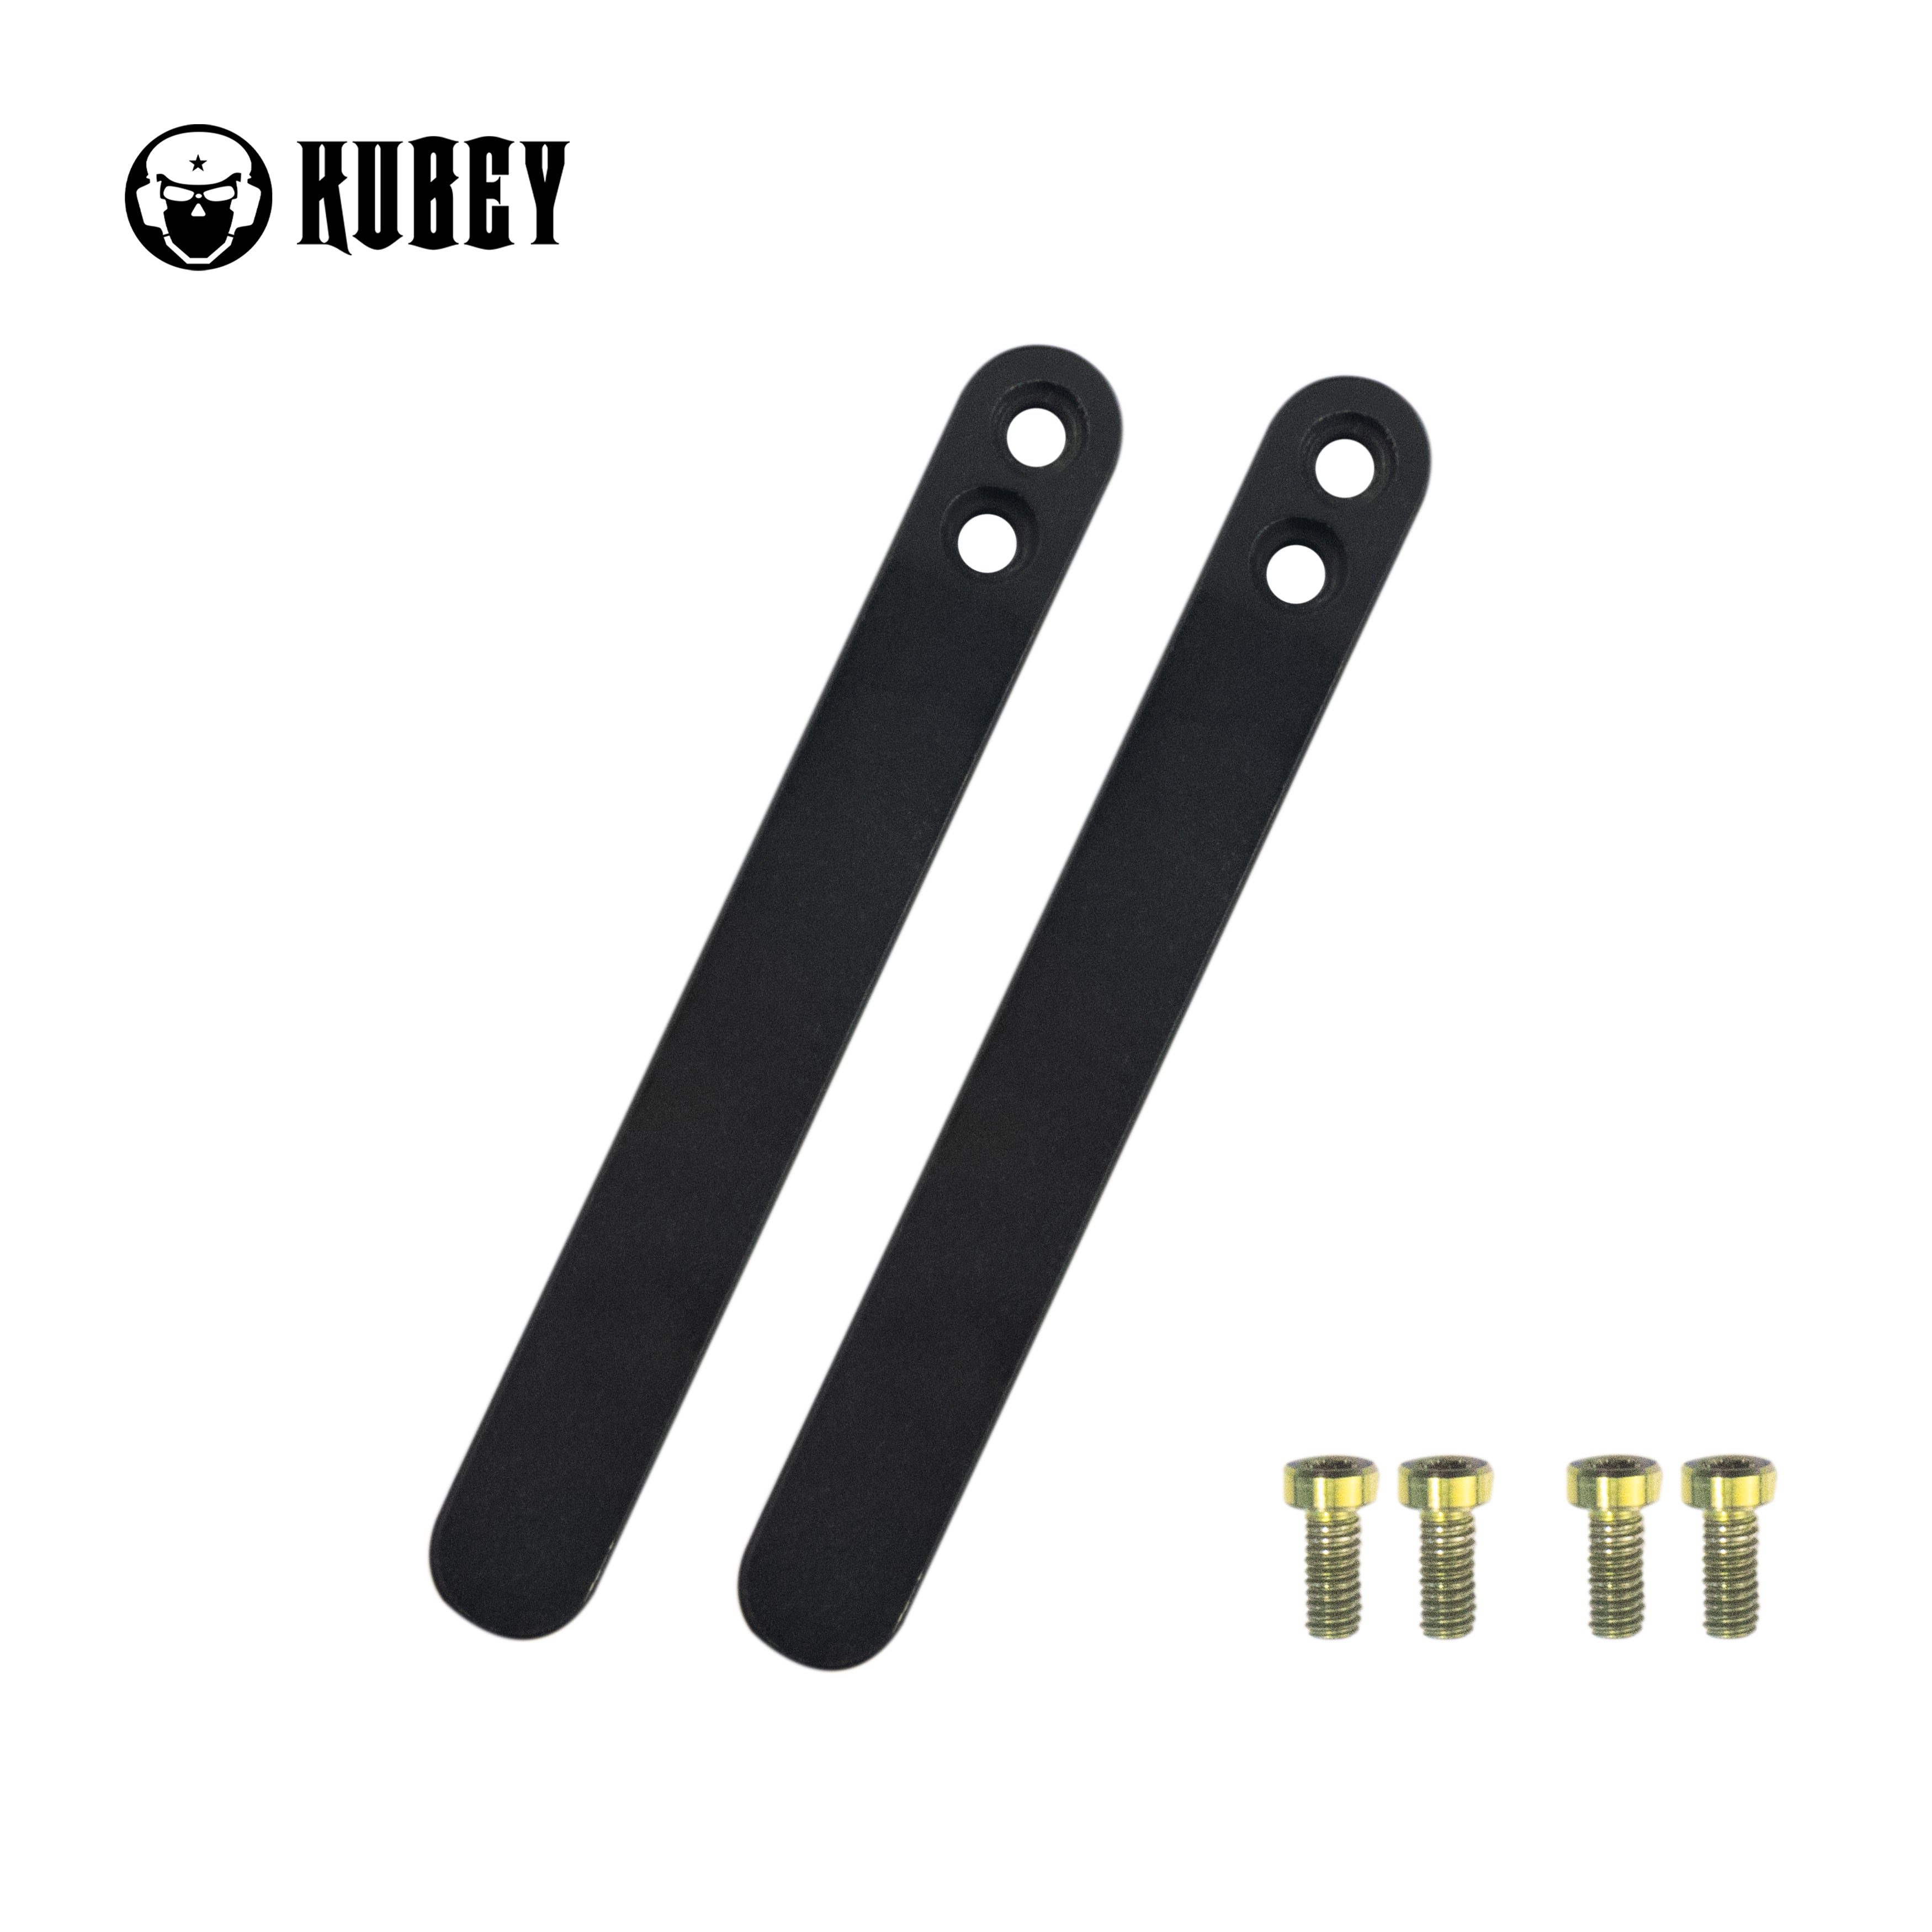 Kubey Titanium Clip for Folding Knives, 2 Pieces with 4 Screws, Black/Black, KH035